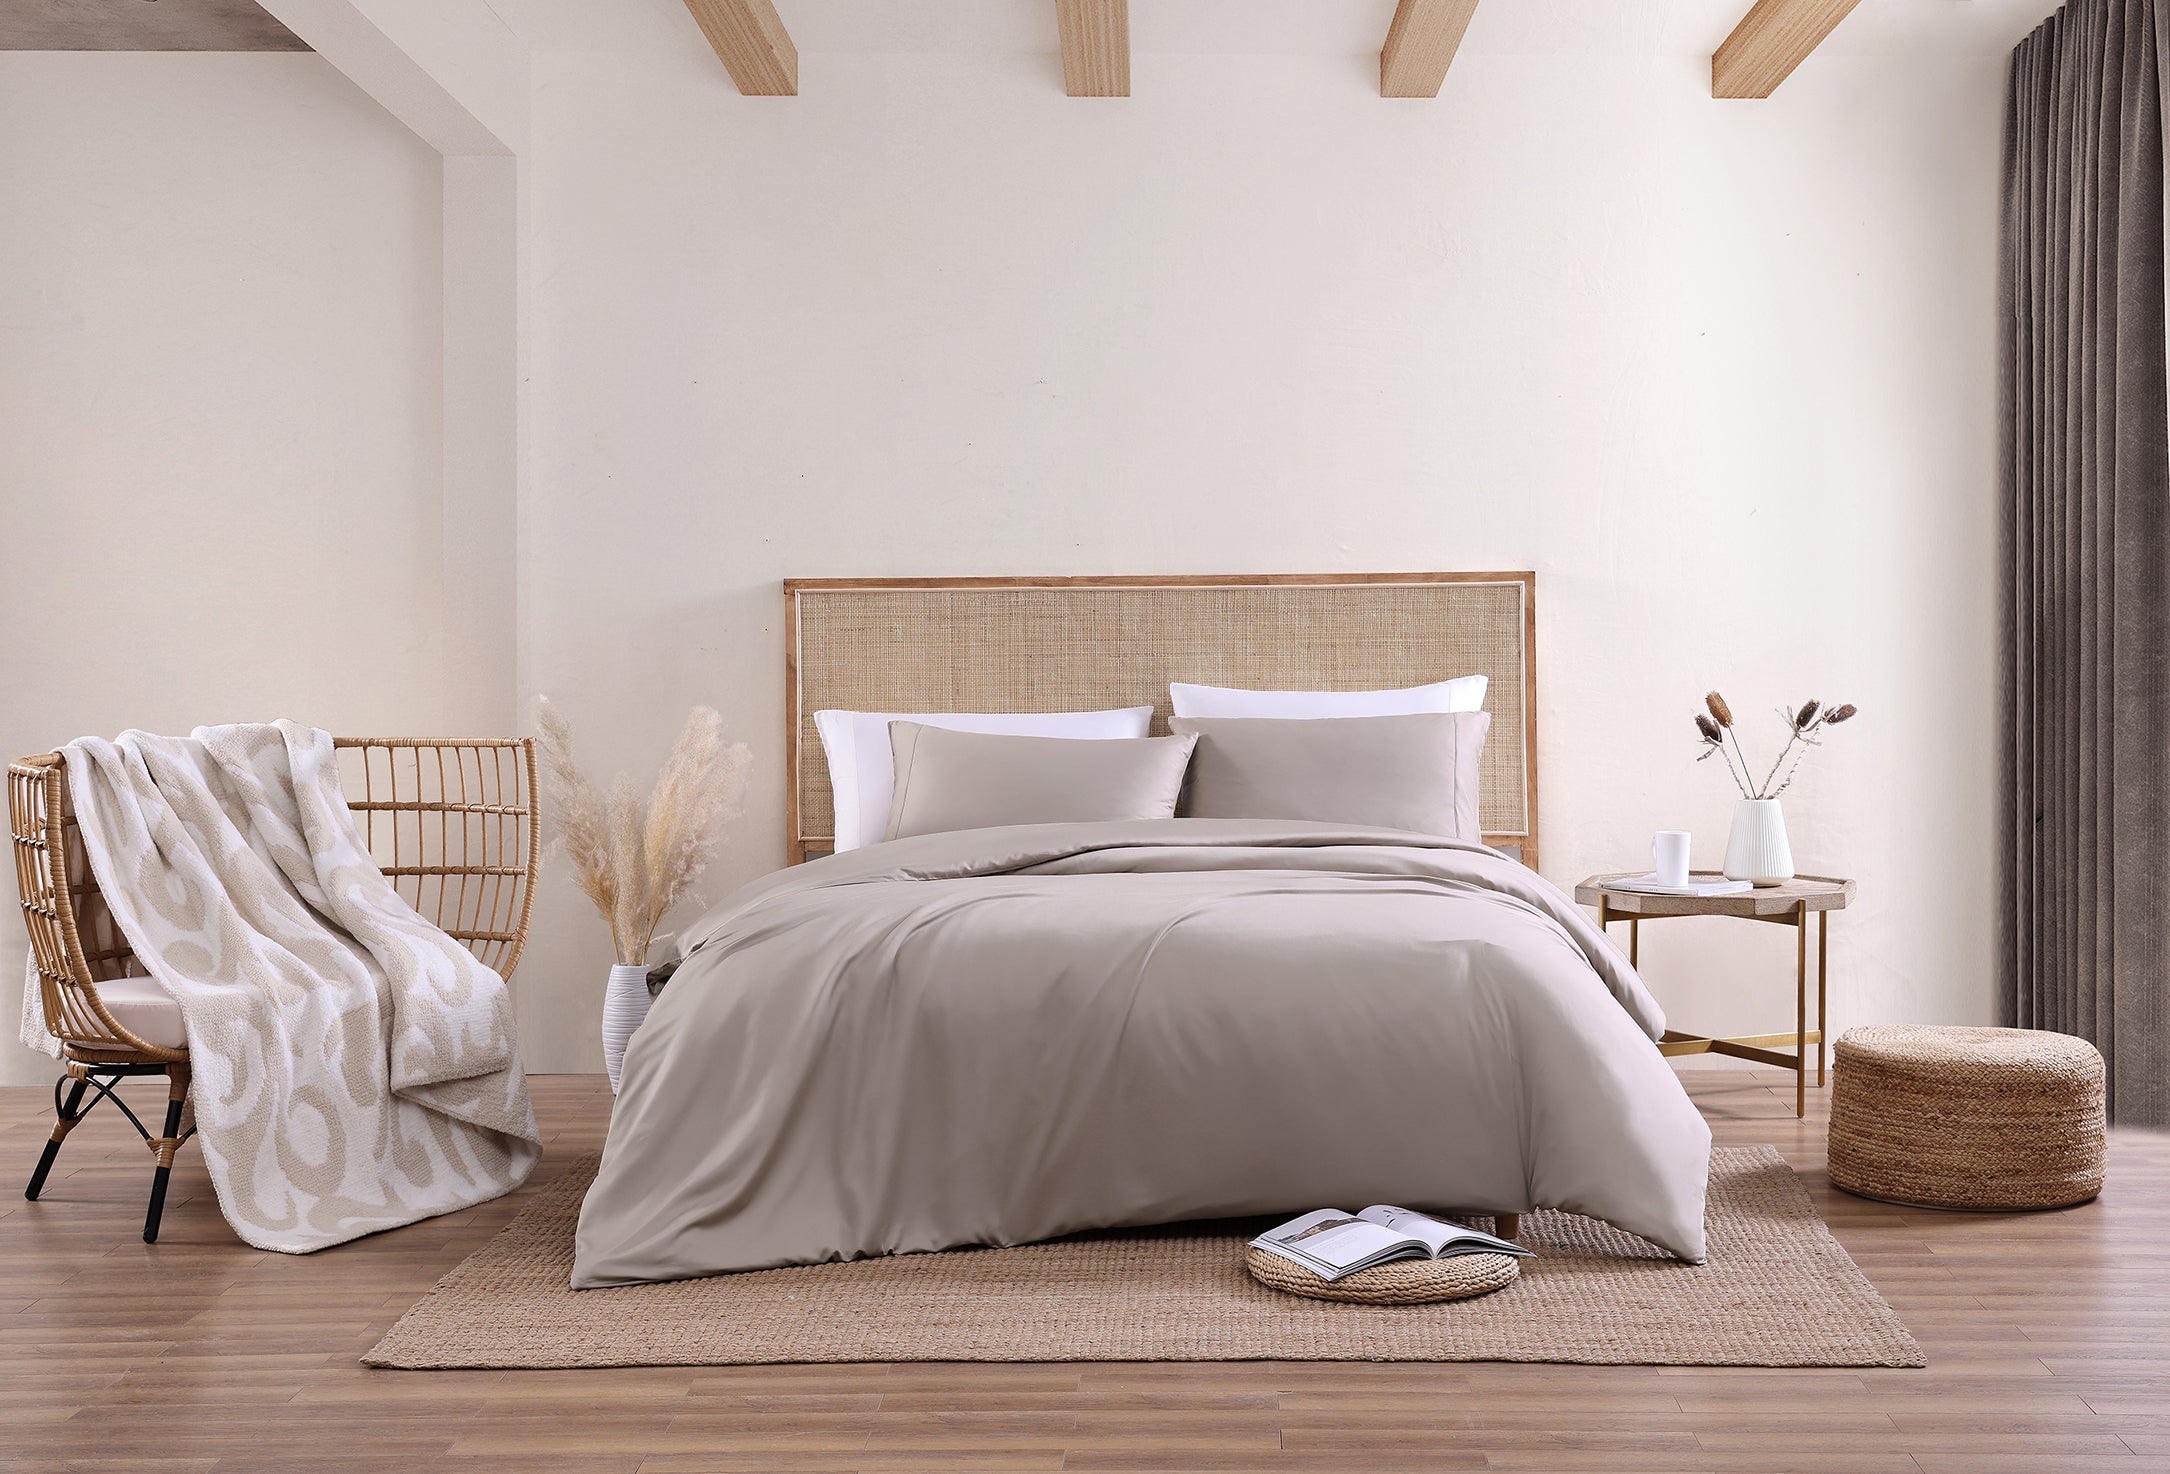 Sunday Citizen's Premium Bamboo Duvet Cover in Taupe and Premium Bamboo Sham Set in Taupe. Taupe colored bedroom. Tan decorated bedroom. Casablanca Throw in Sahara Tan laying on a chair. 